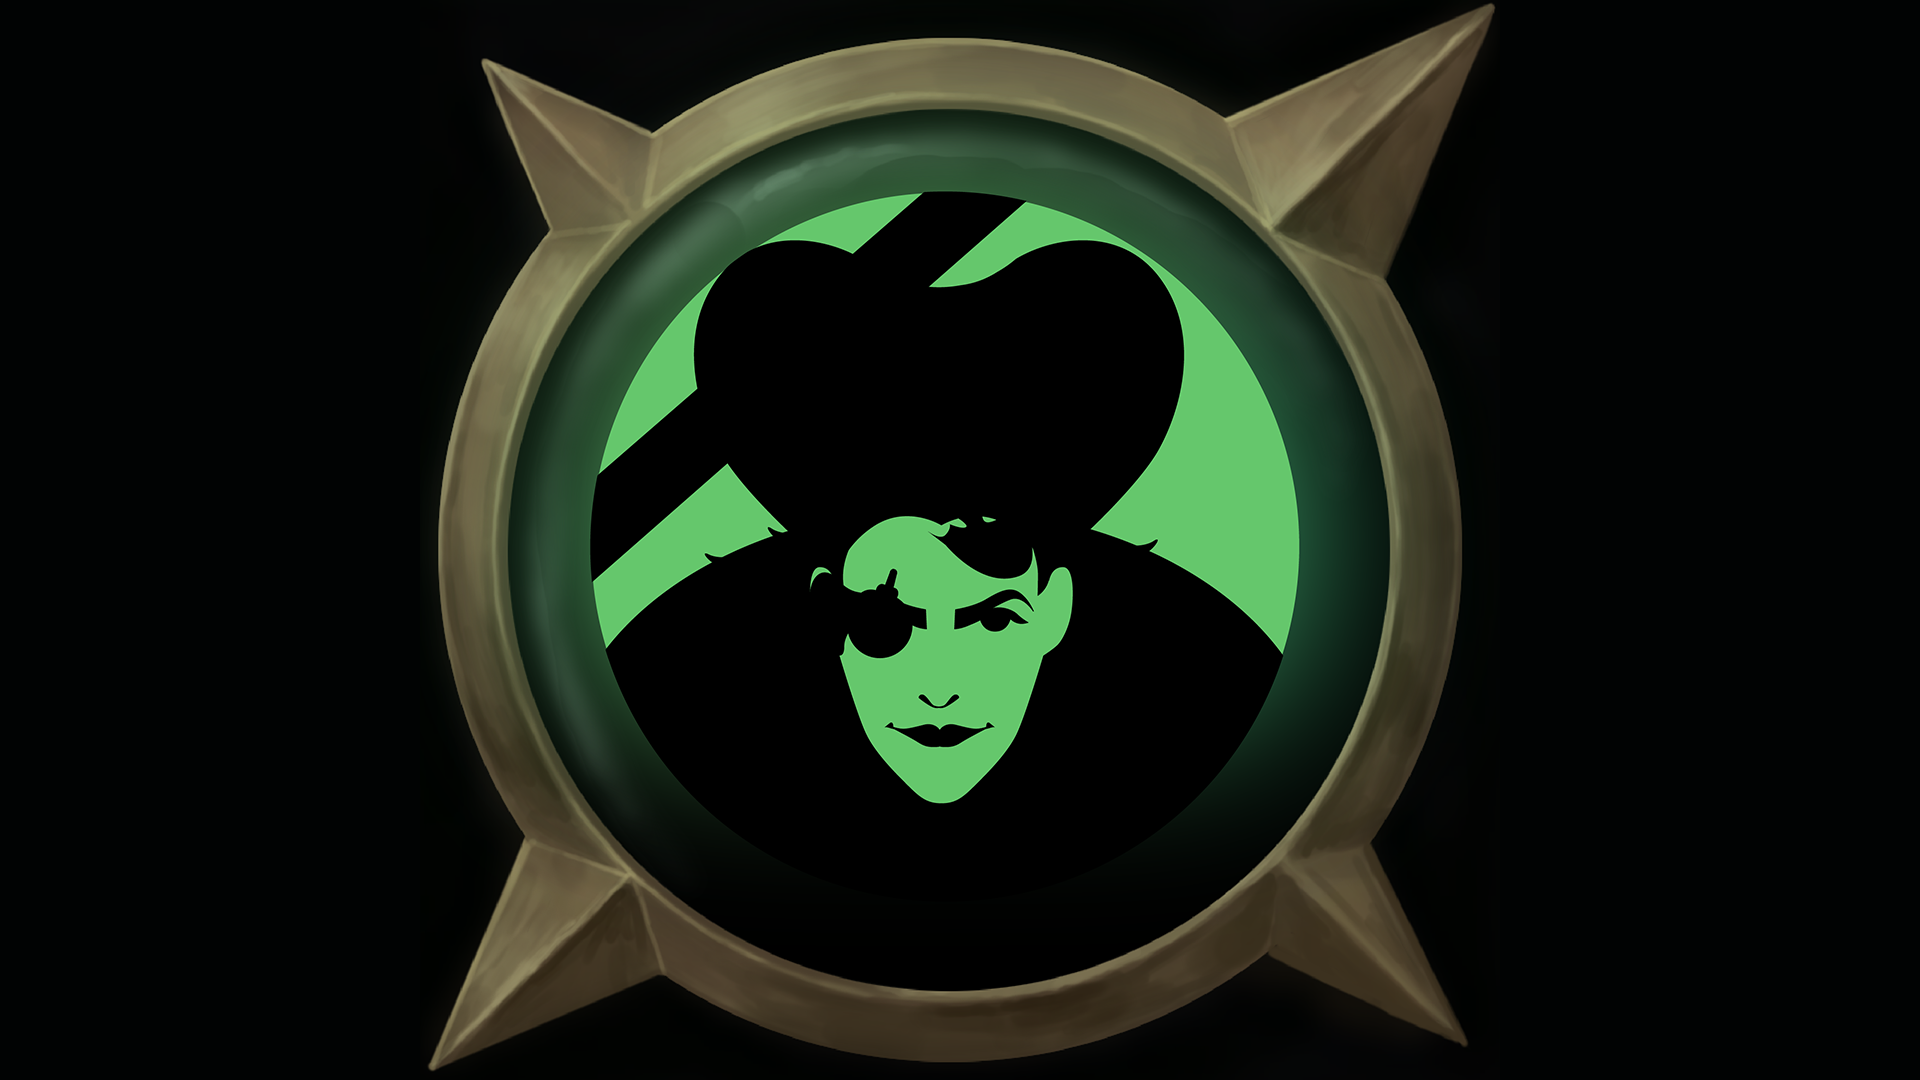 Icon for Whodunit?